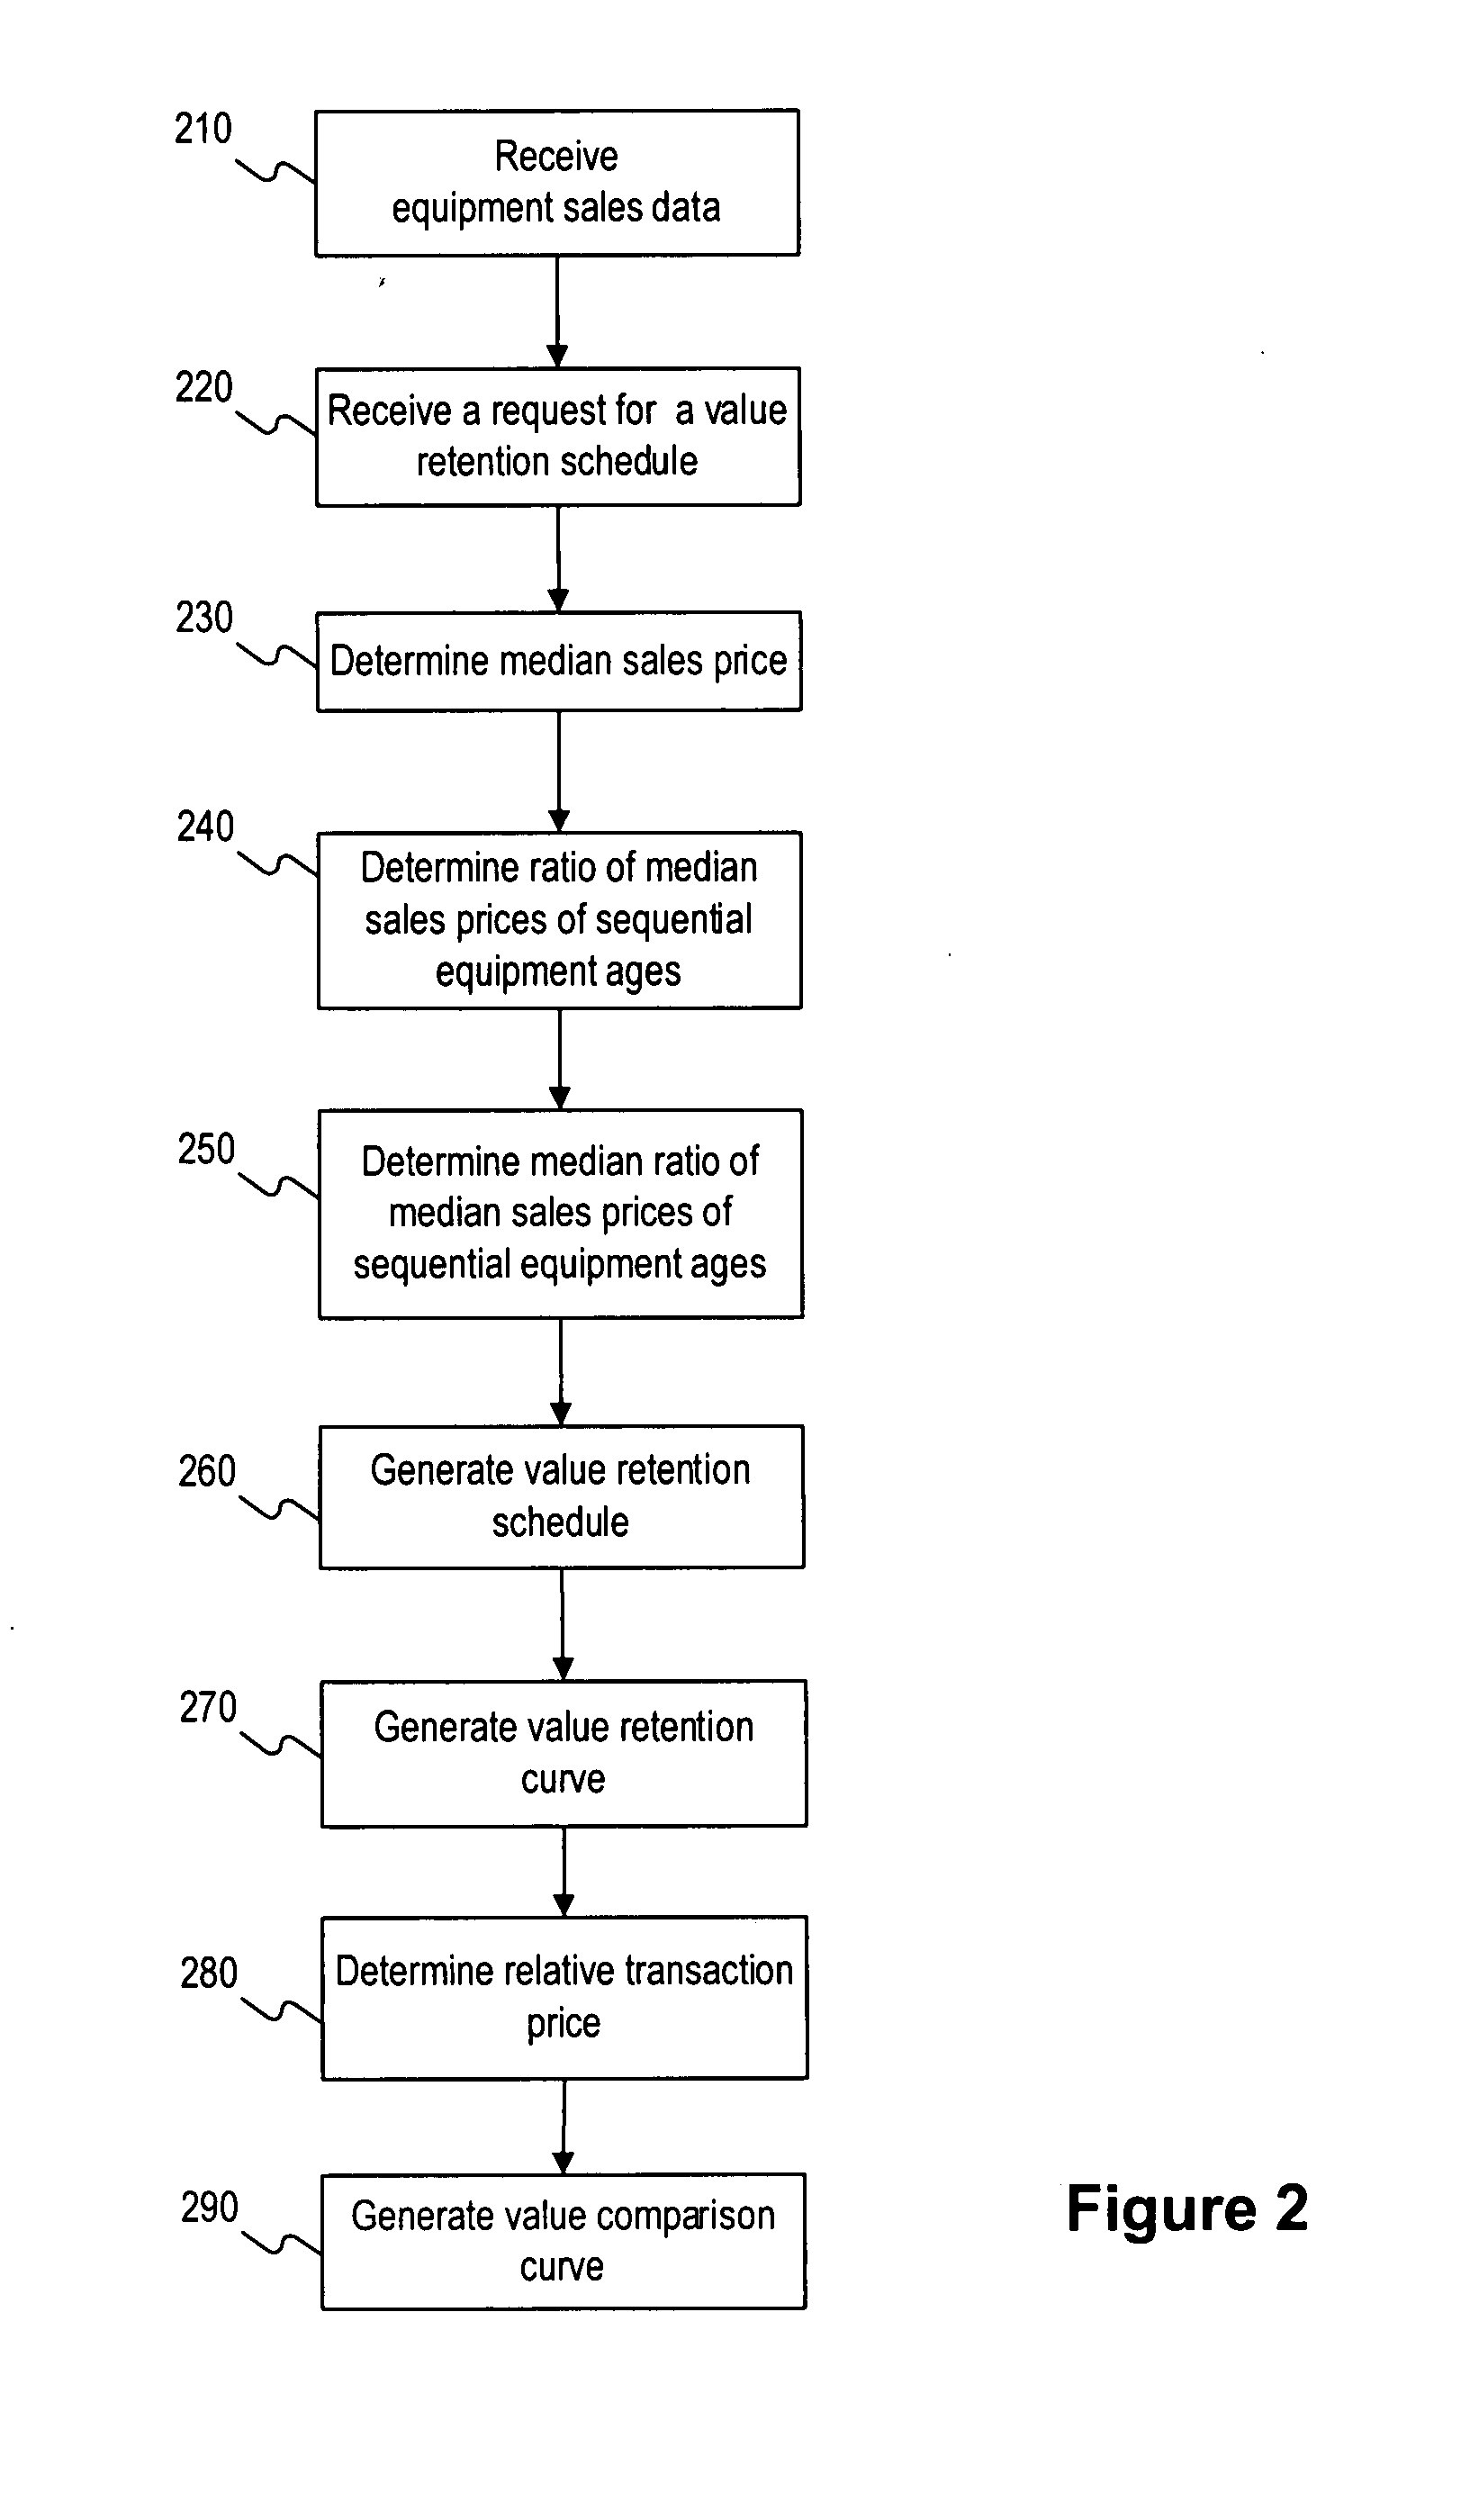 System and method for generating a value retention schedule